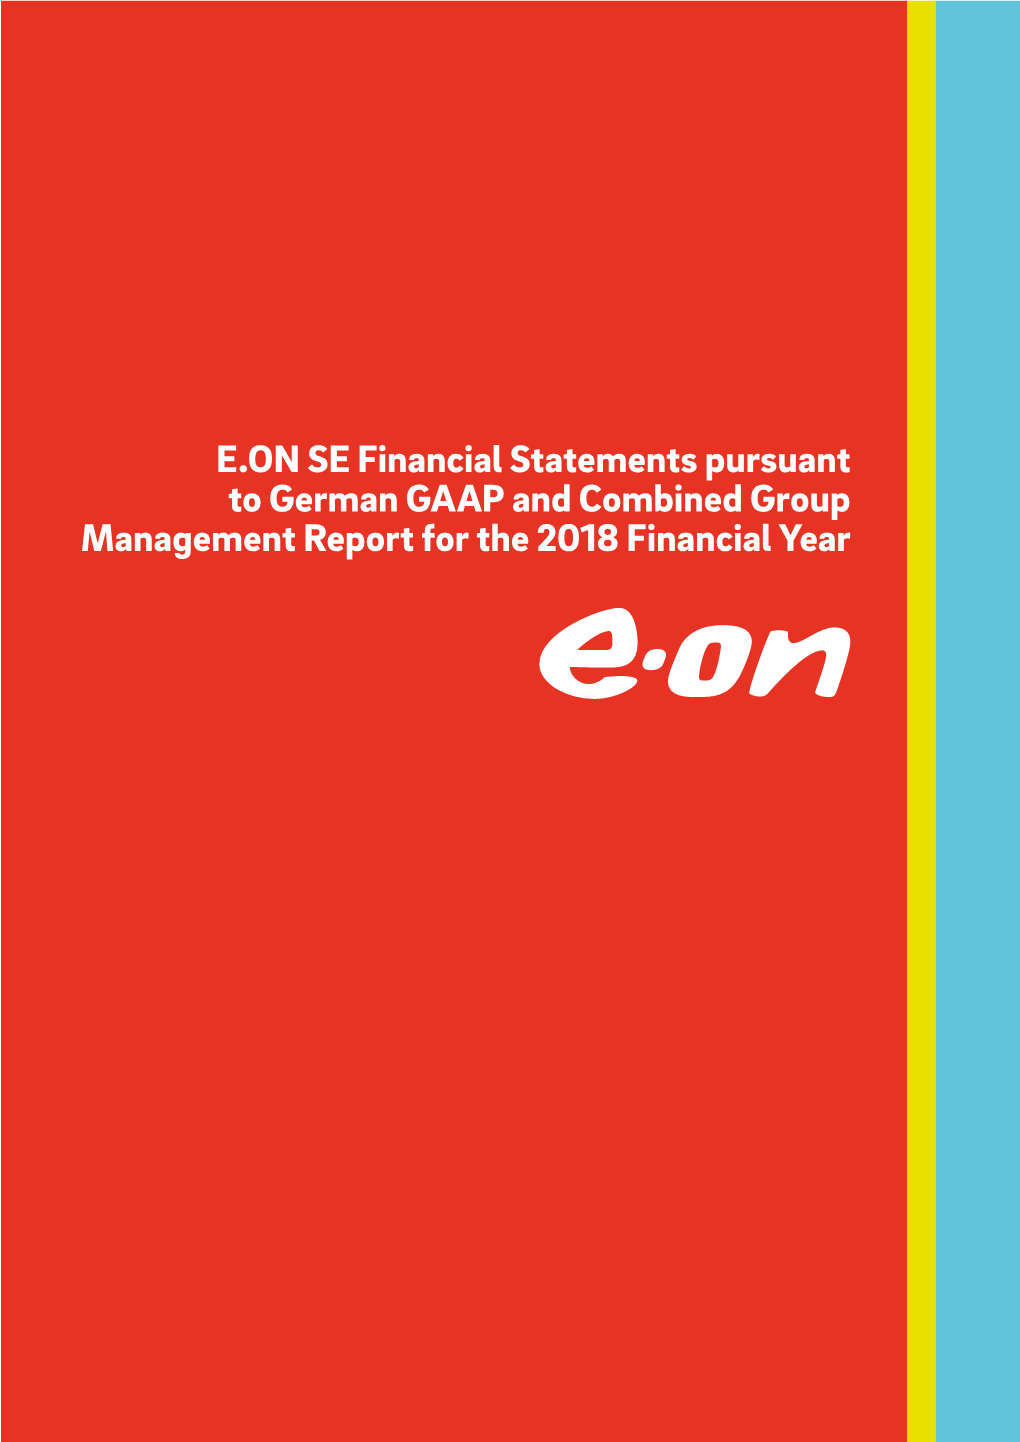 Annual Financial Statements of E.ON SE As of December 31, 2018